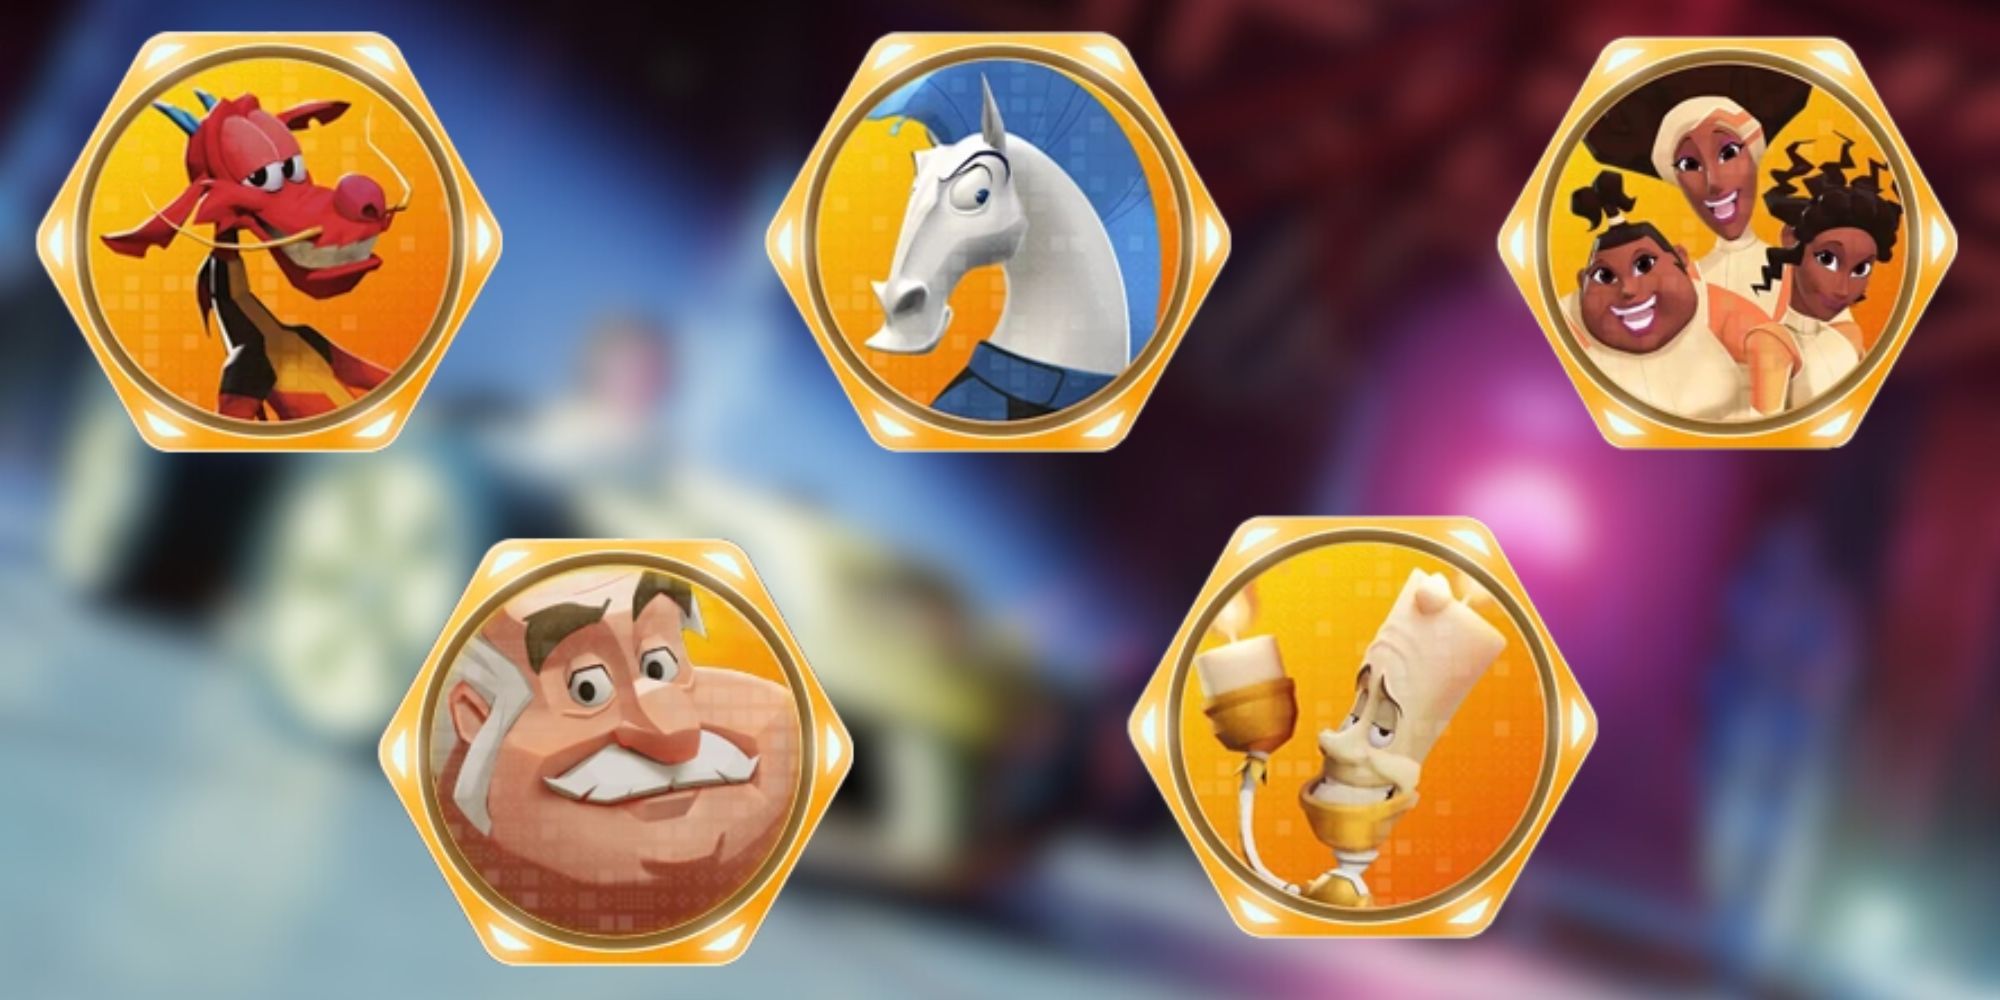 Crew Members Chips from Disney Speedstorm on a blurred image background of the game